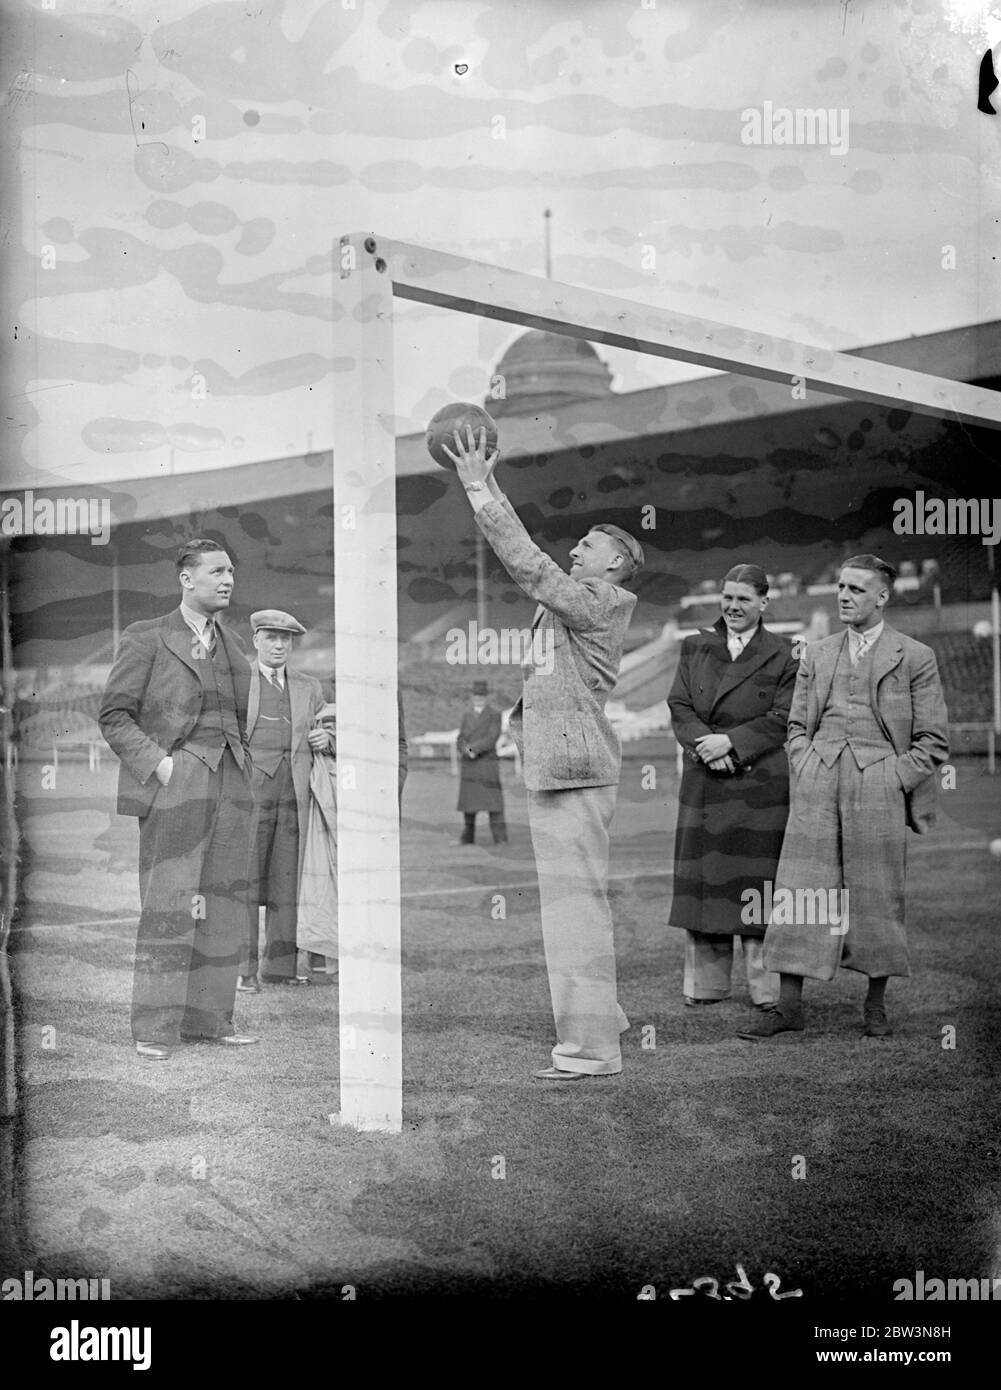 Sheffield United inspect cup final pitch at Wembley . The Sheffield United team which is to meet Arsenal in the FA Cup Final tomorrow ( Saturday ) inspected the pitch at Wembley Stadium . Photo shows , Jack Smith , the Sheffield goalkeeper , testing the height of the goalposts . 24 April 1936 Stock Photo